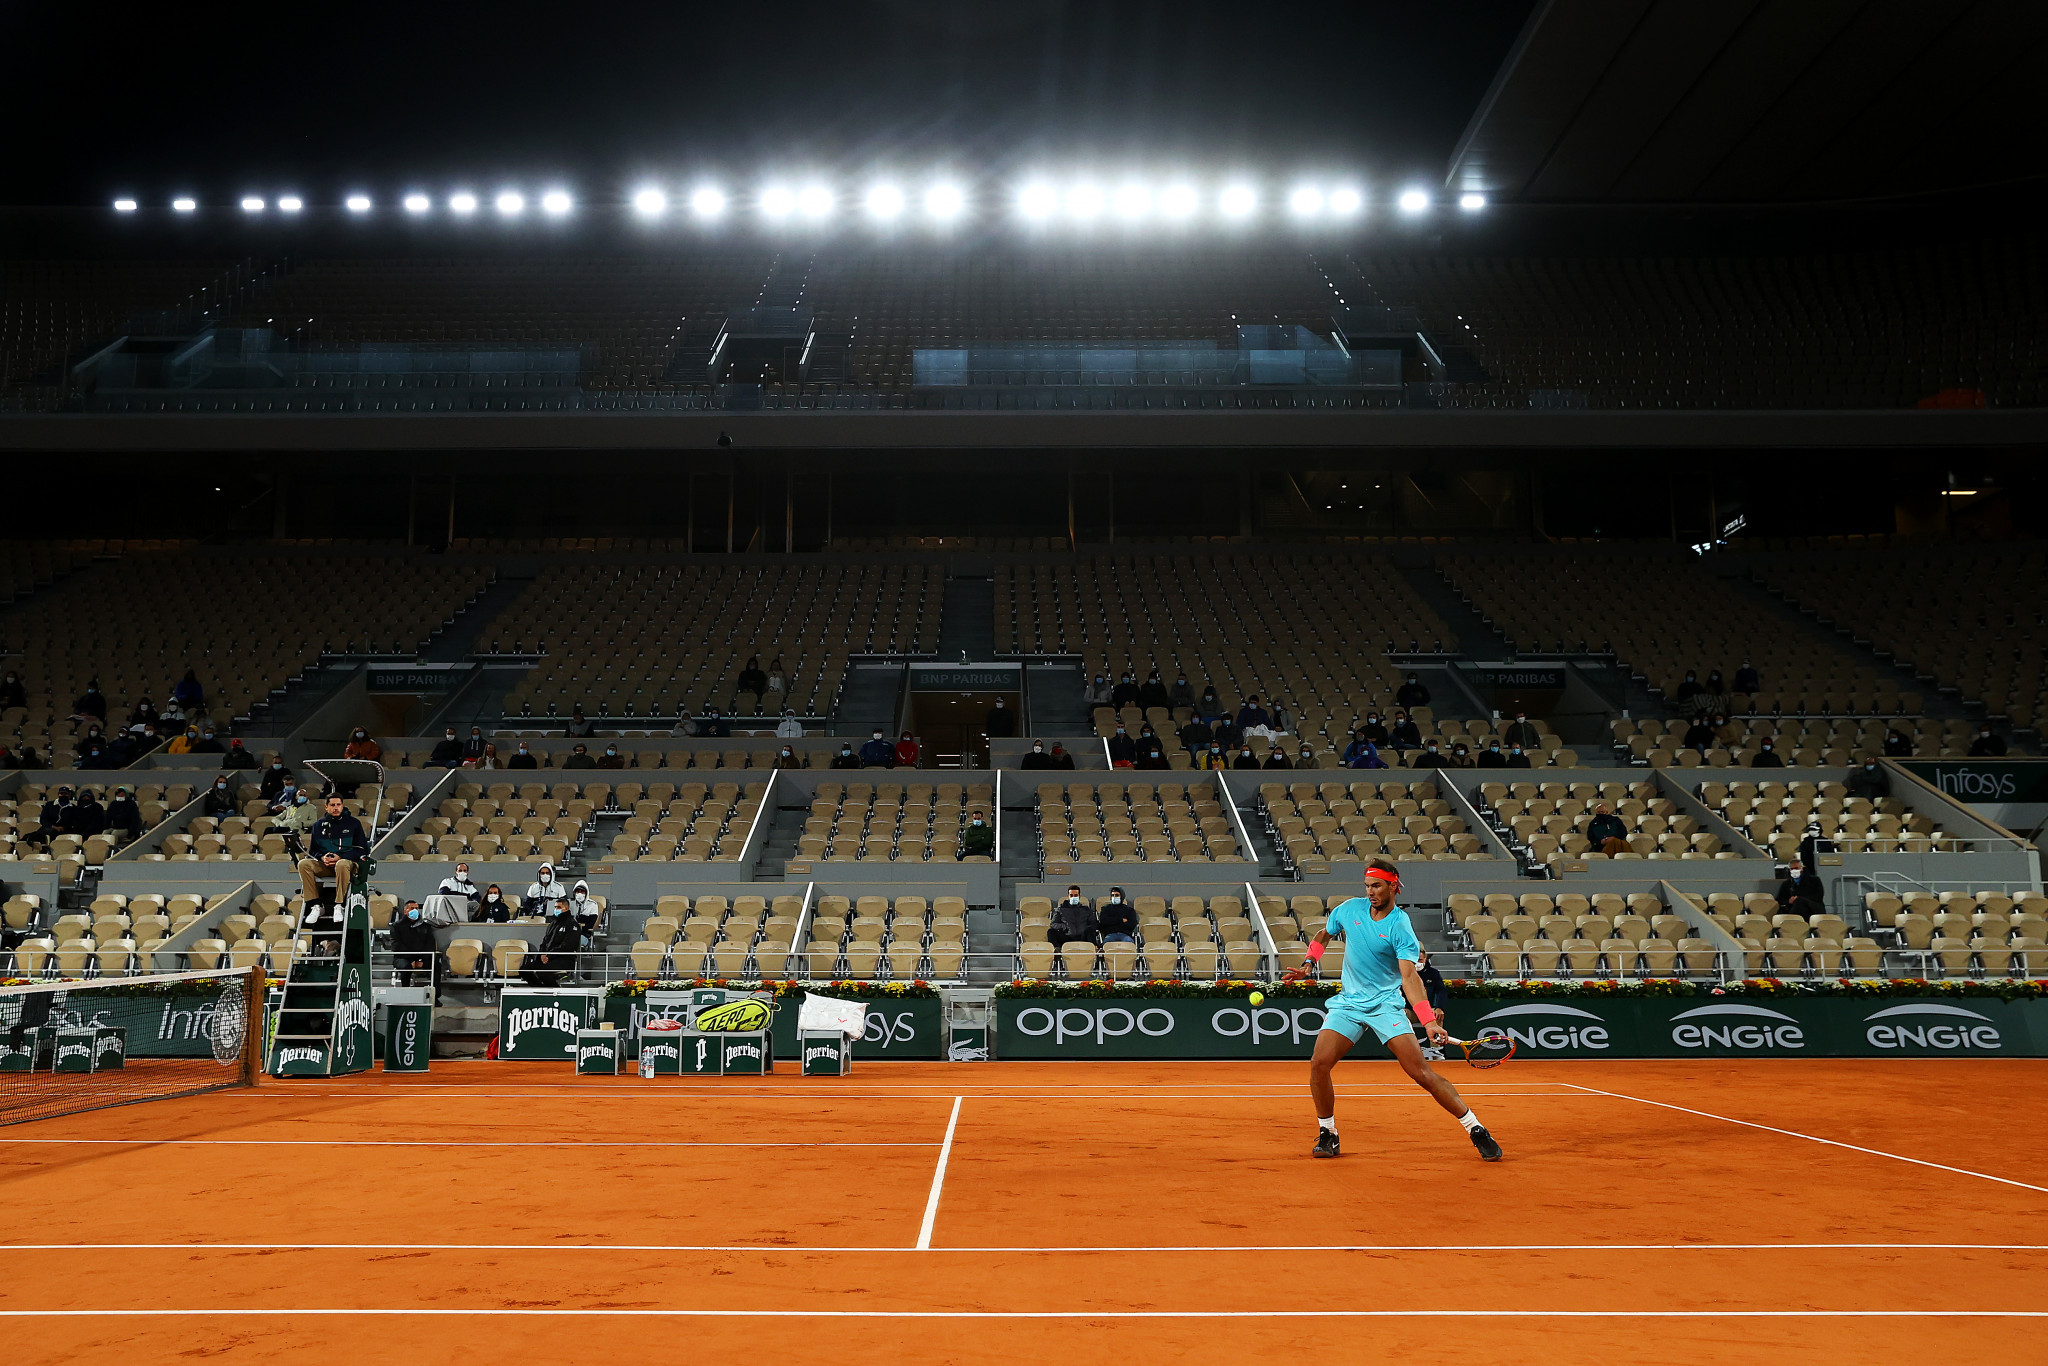 French Open spectator capacity capped at 35 per cent due to COVID-19